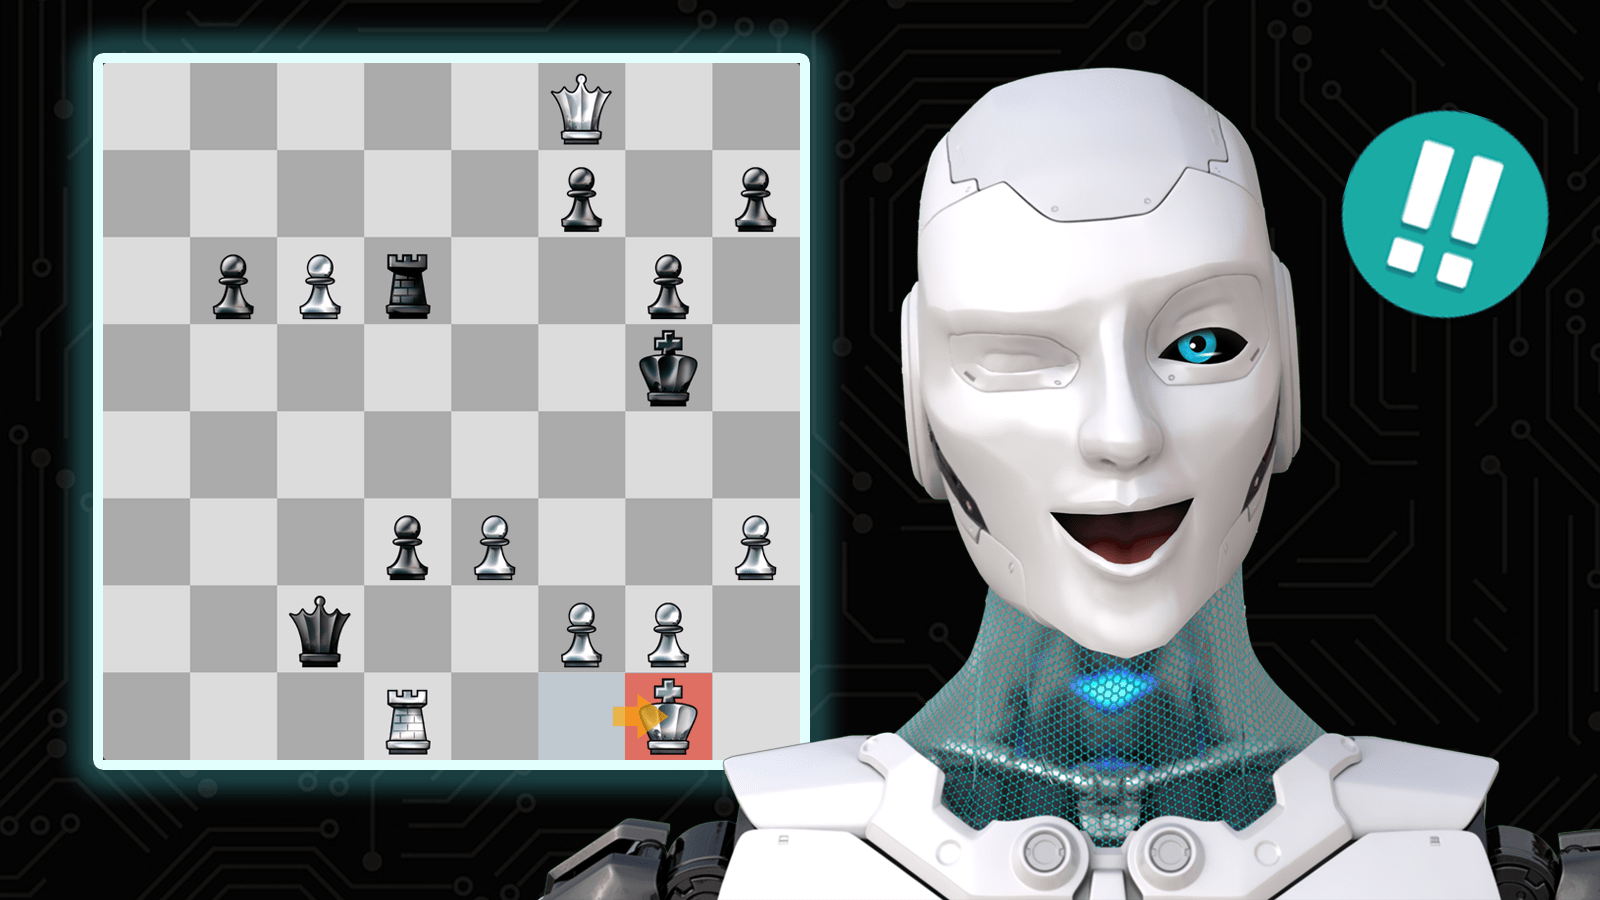 play chess online vs the computer